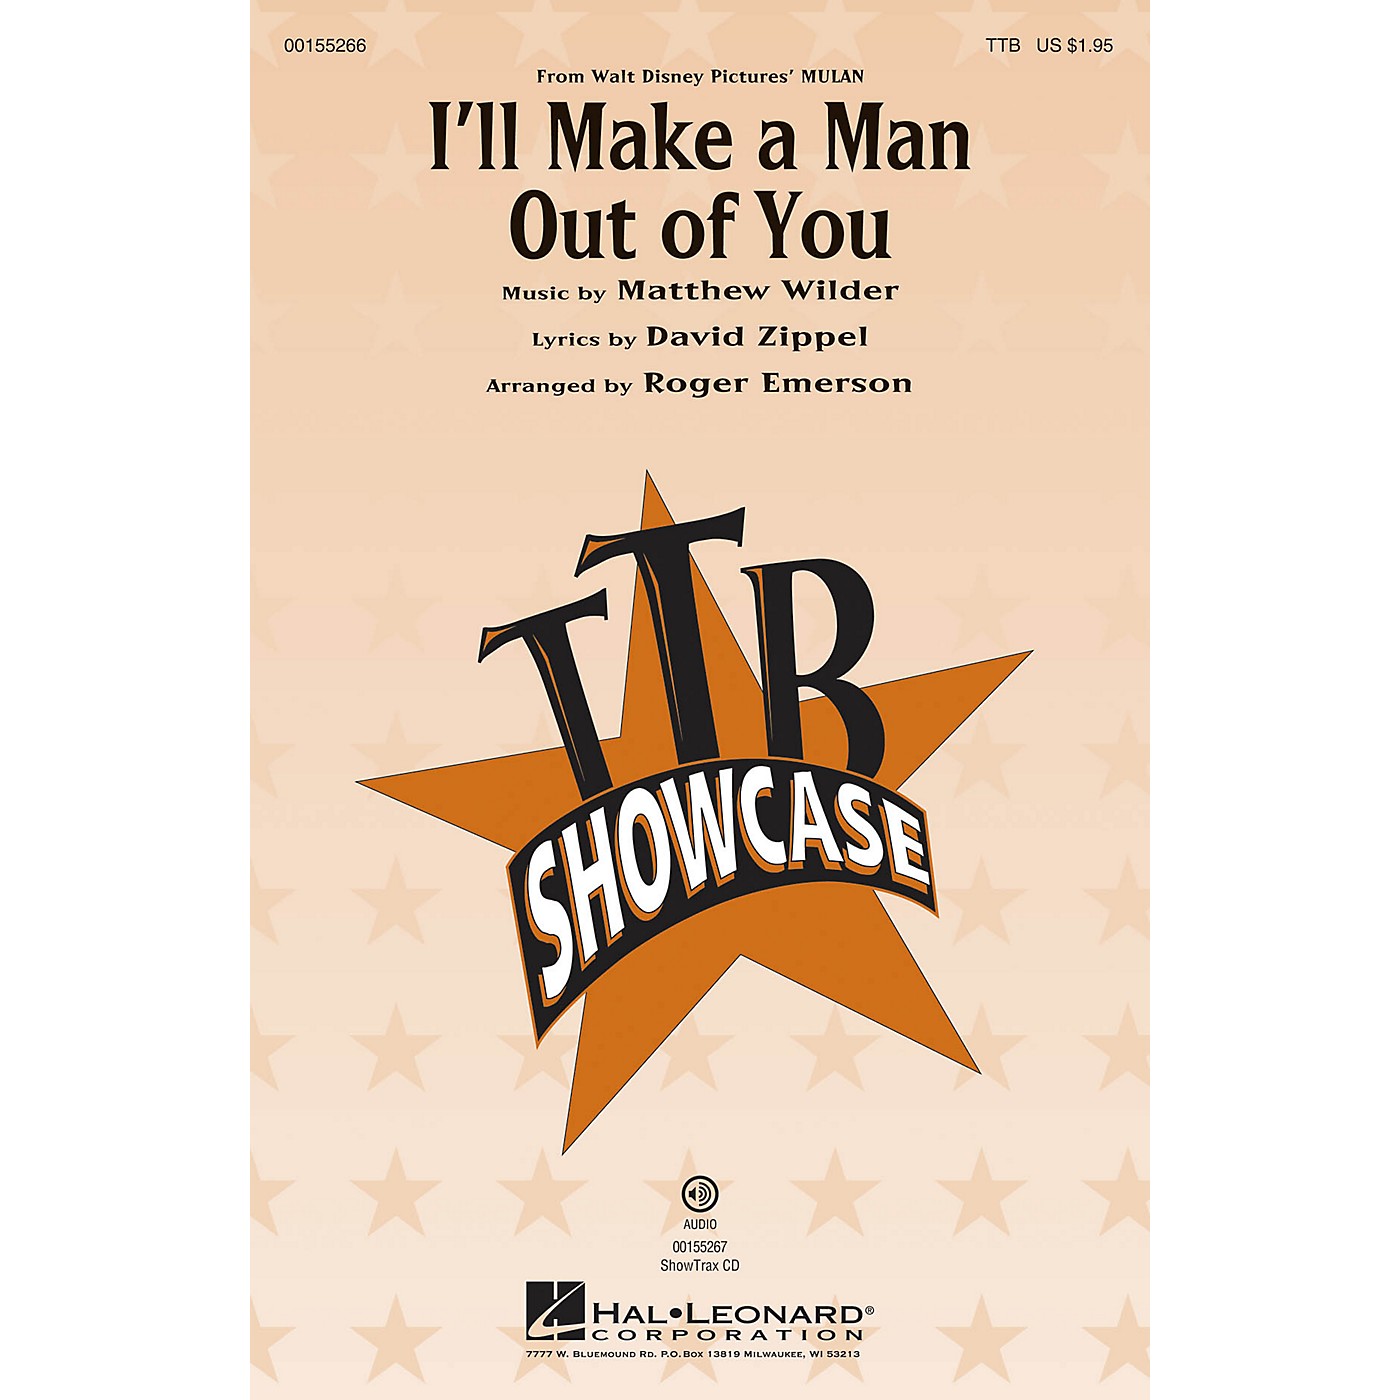 Hal Leonard I'll Make a Man out of You (from Mulan) TBB arranged by Roger Emerson thumbnail